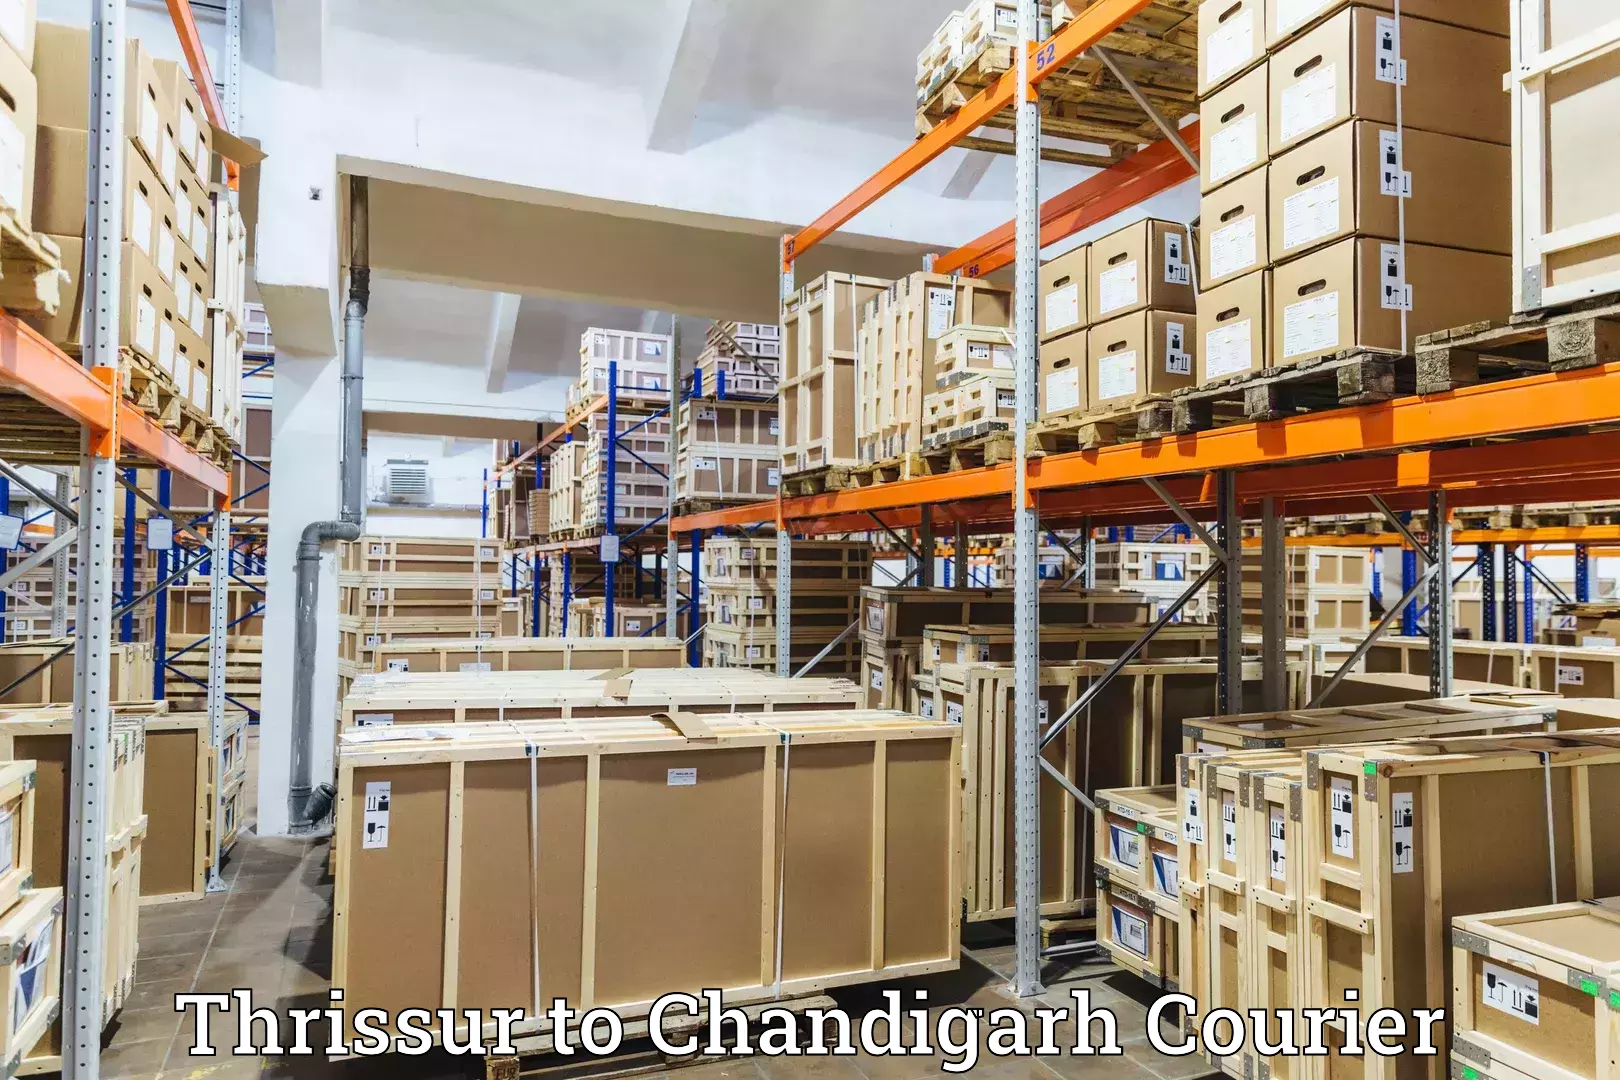 Customizable shipping options Thrissur to Chandigarh